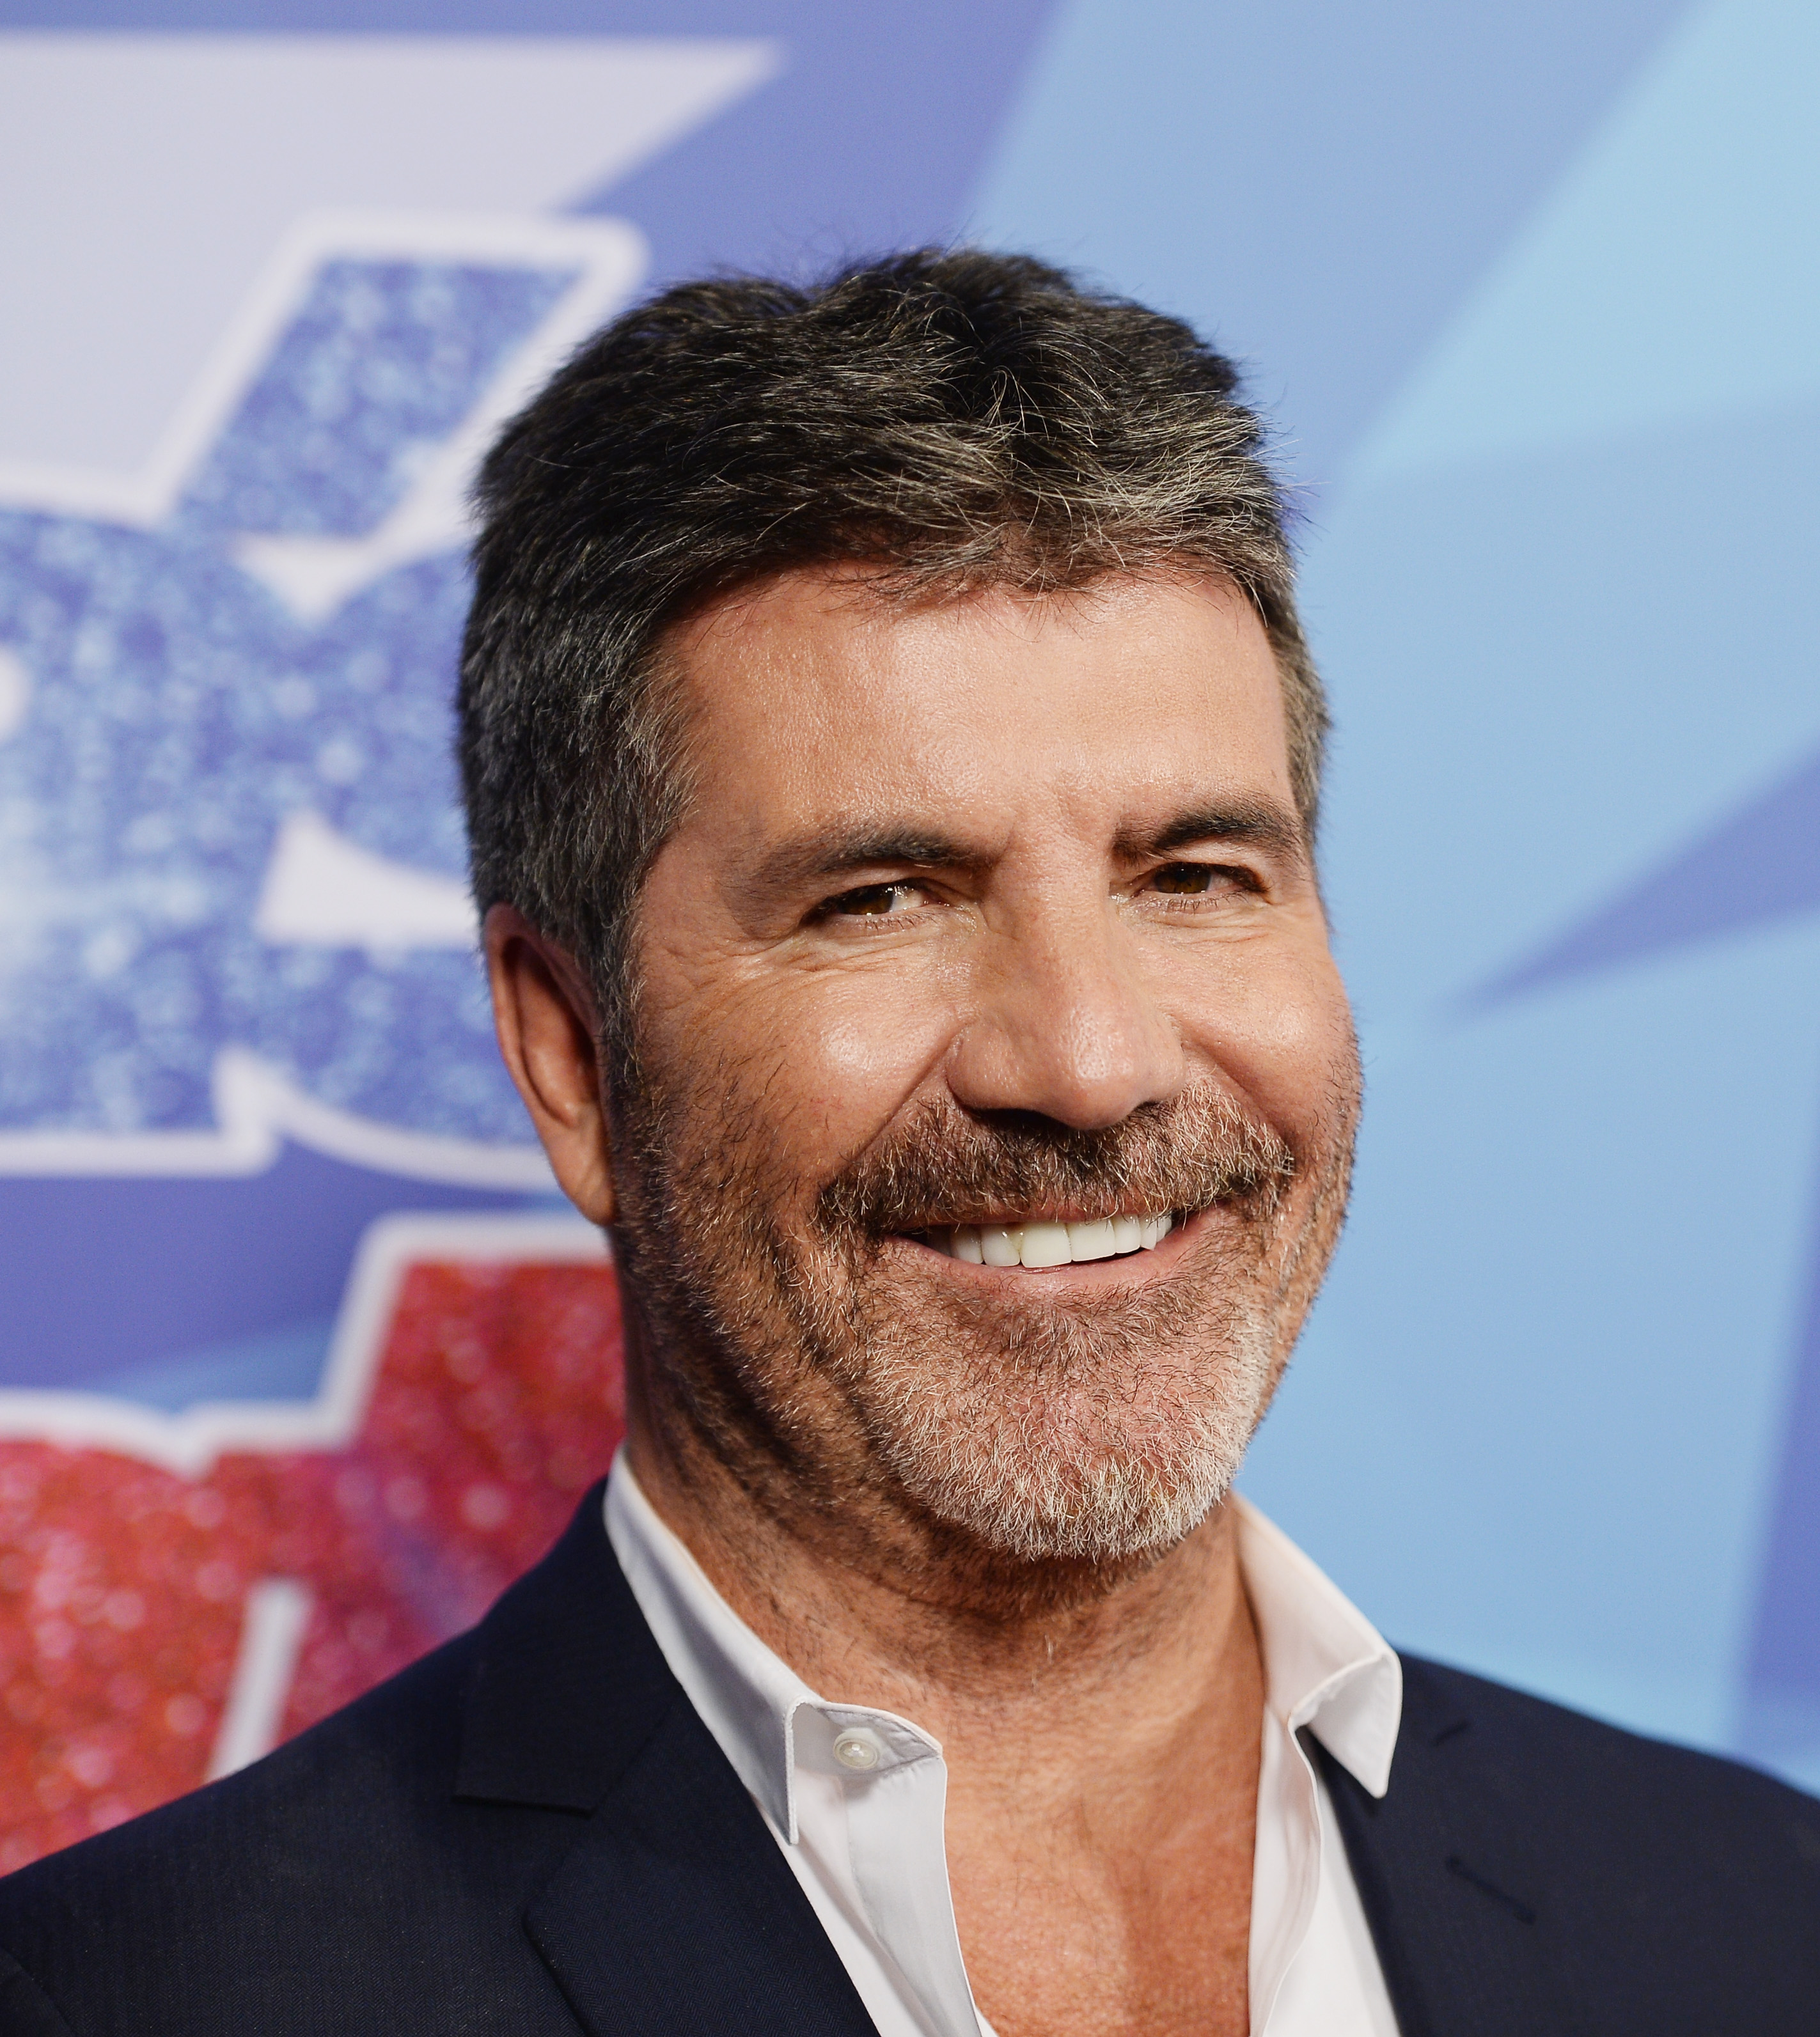 Simon Cowell at the "America's Got Talent" finale in 2017 | Source: Getty Images